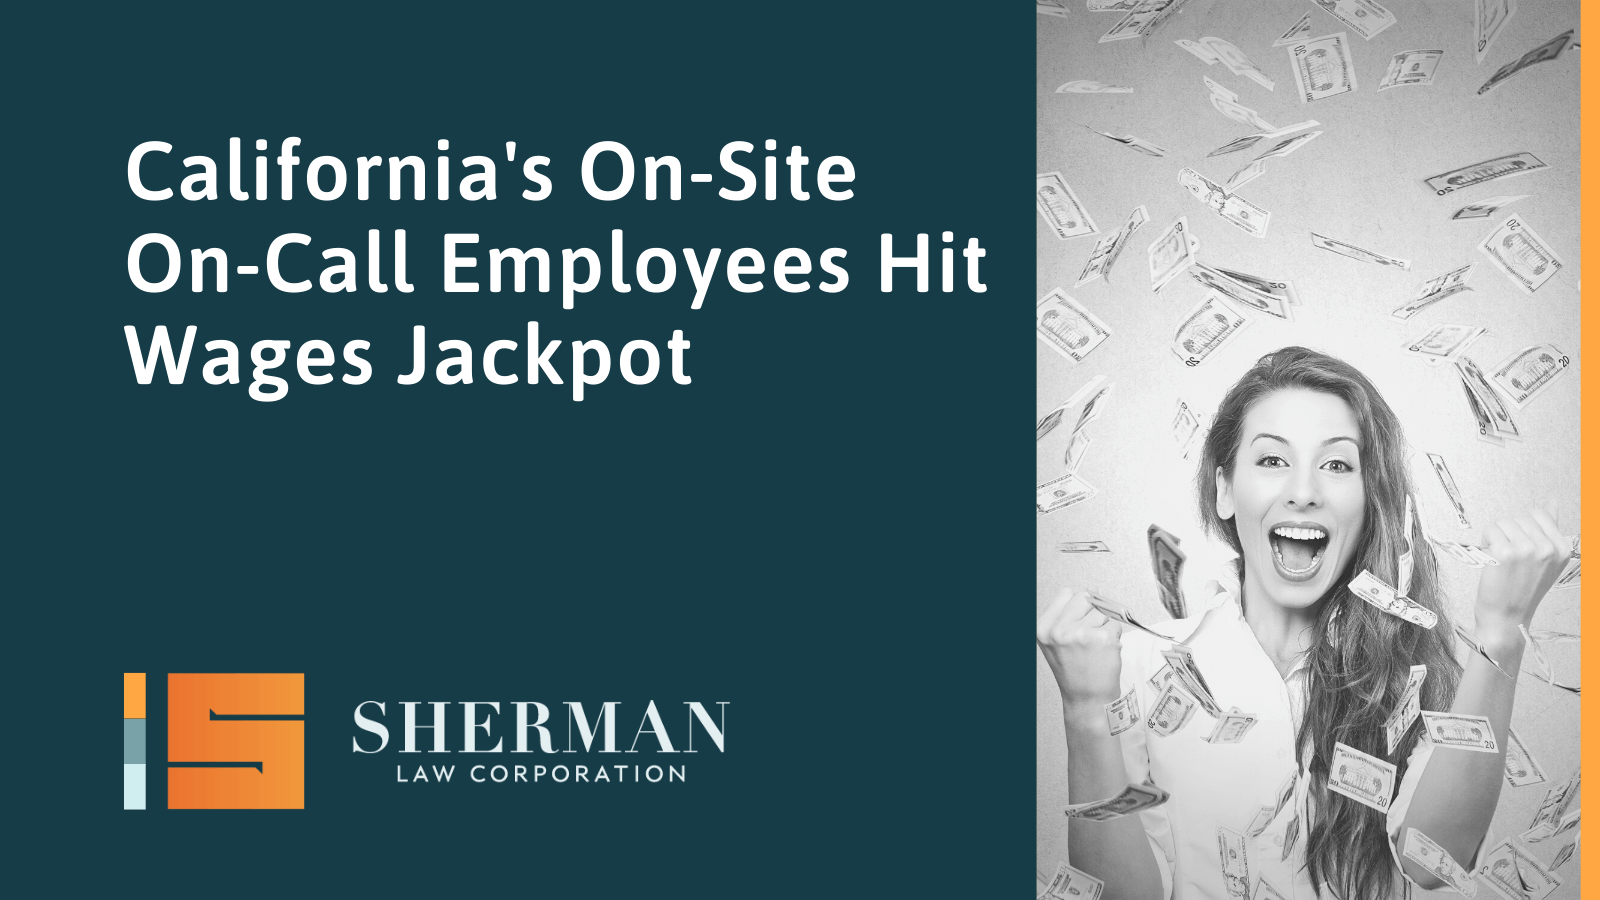 California's On-Site On-Call Employees Hit Wages Jackpot - sherman law corporation